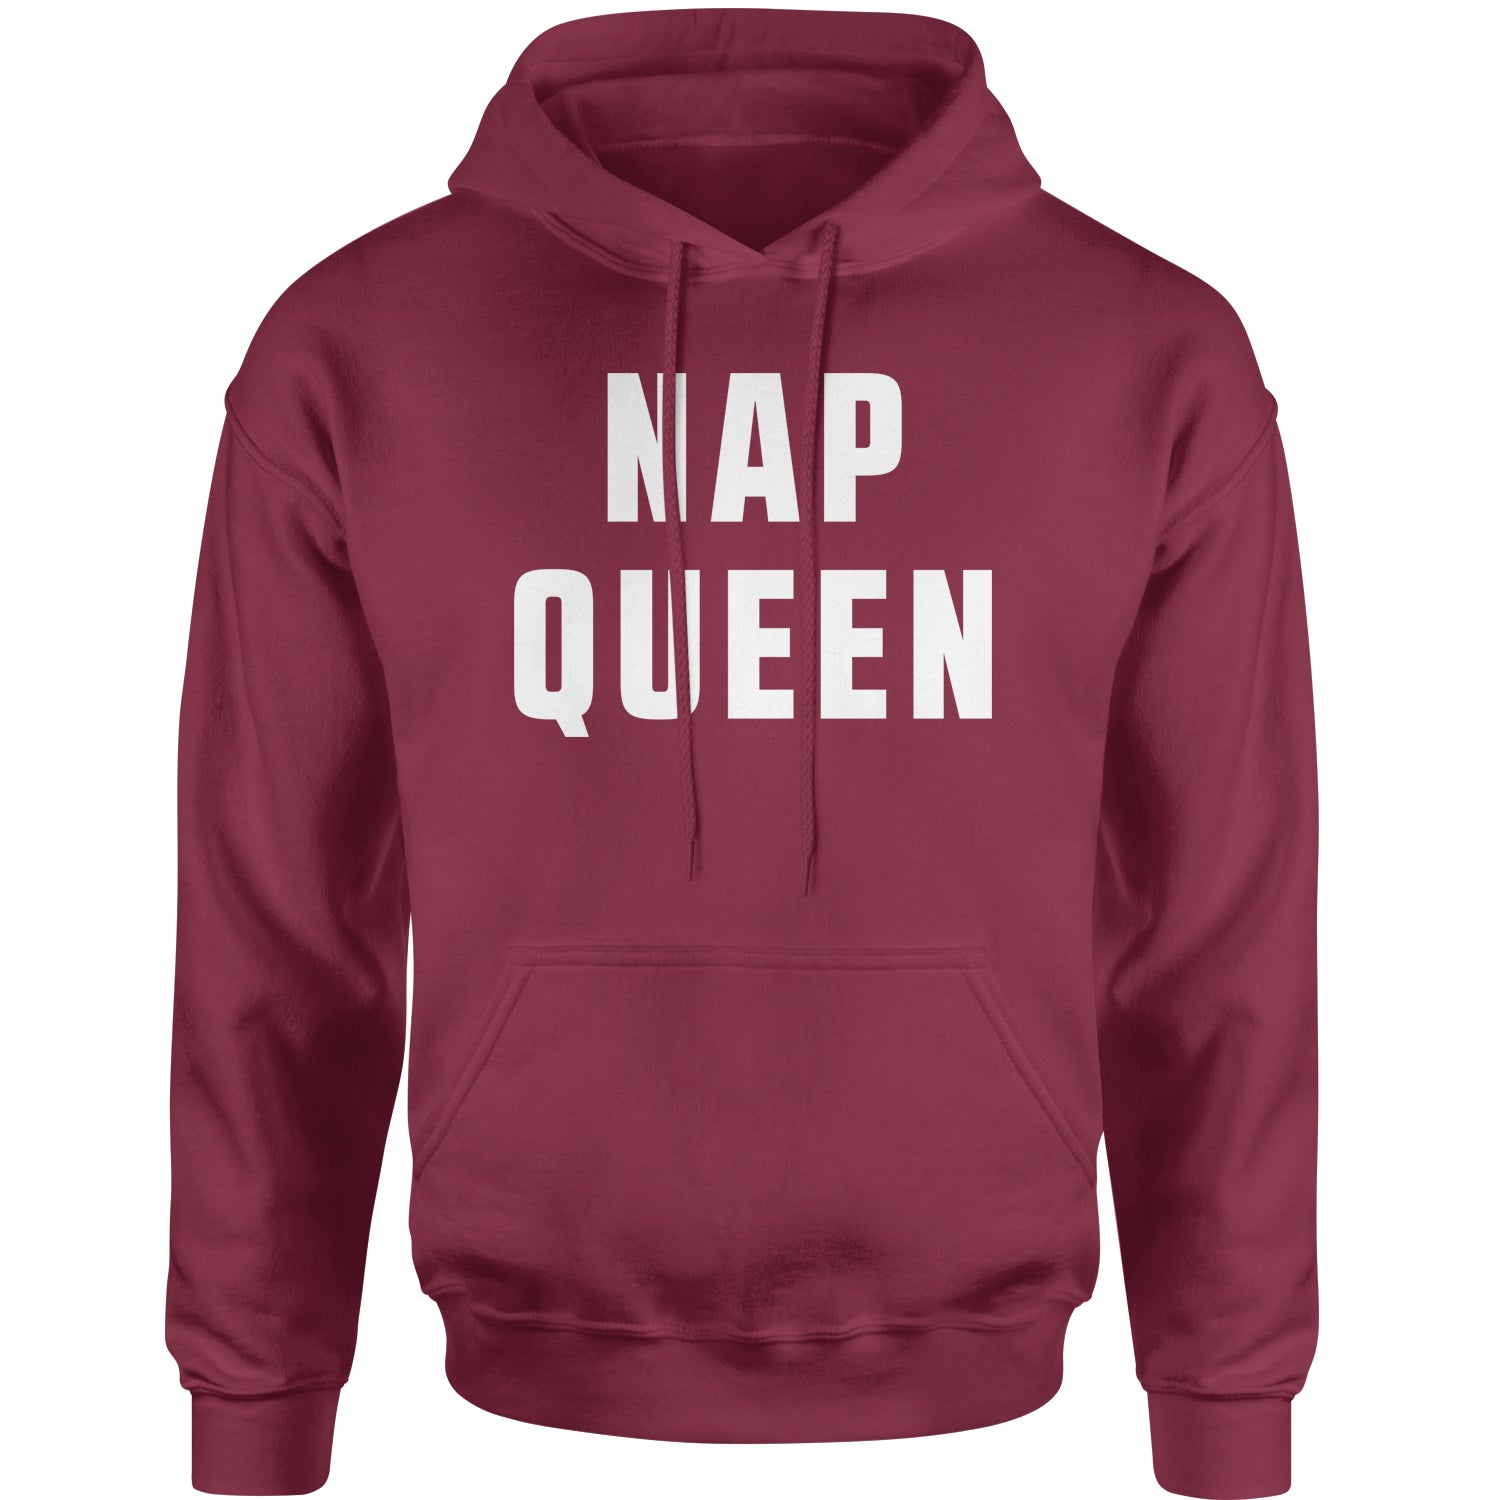 Nap Queen (White Print) Comfy Top For Lazy Days Adult Hoodie Sweatshirt all, day, function, lazy, nap, pajamas, queen, siesta, sleep, tired, to, too by Expression Tees